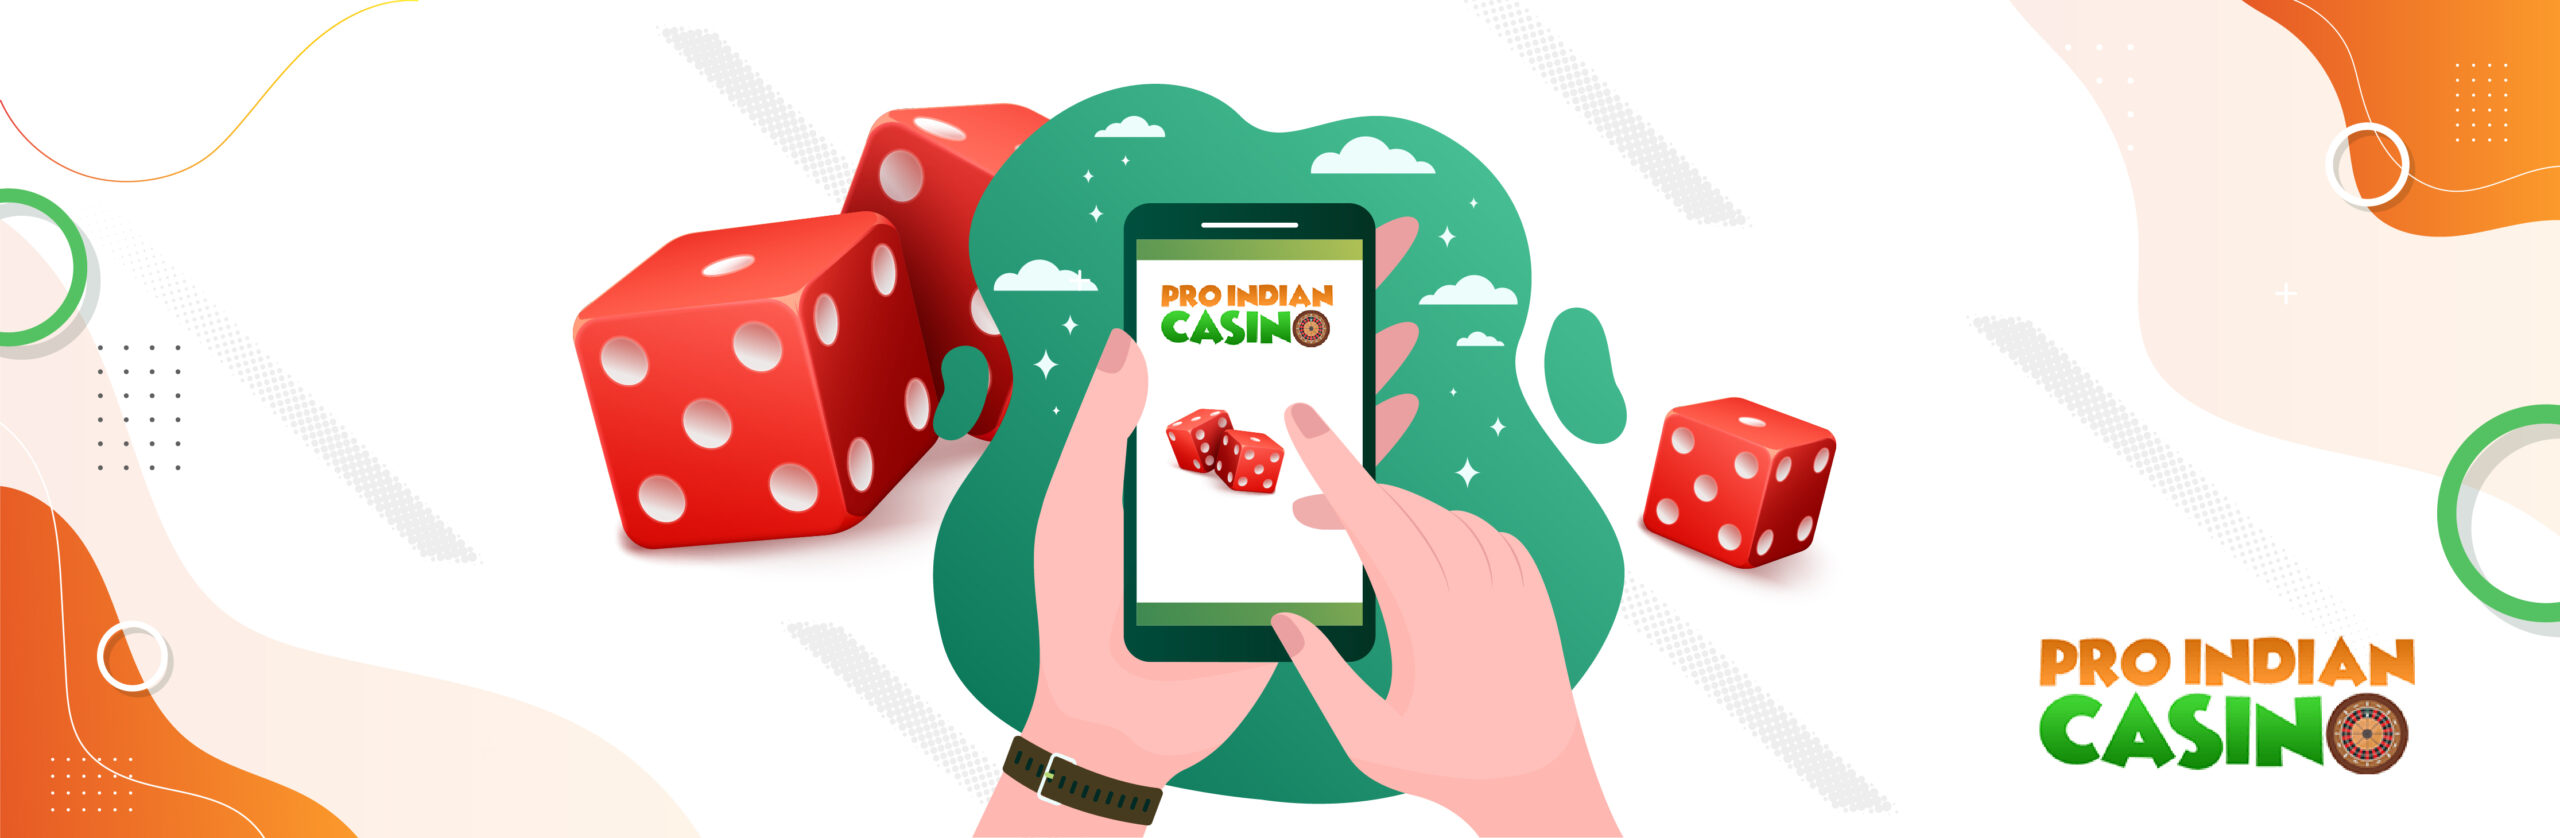 15 Creative Ways You Can Improve Your casino blue chip